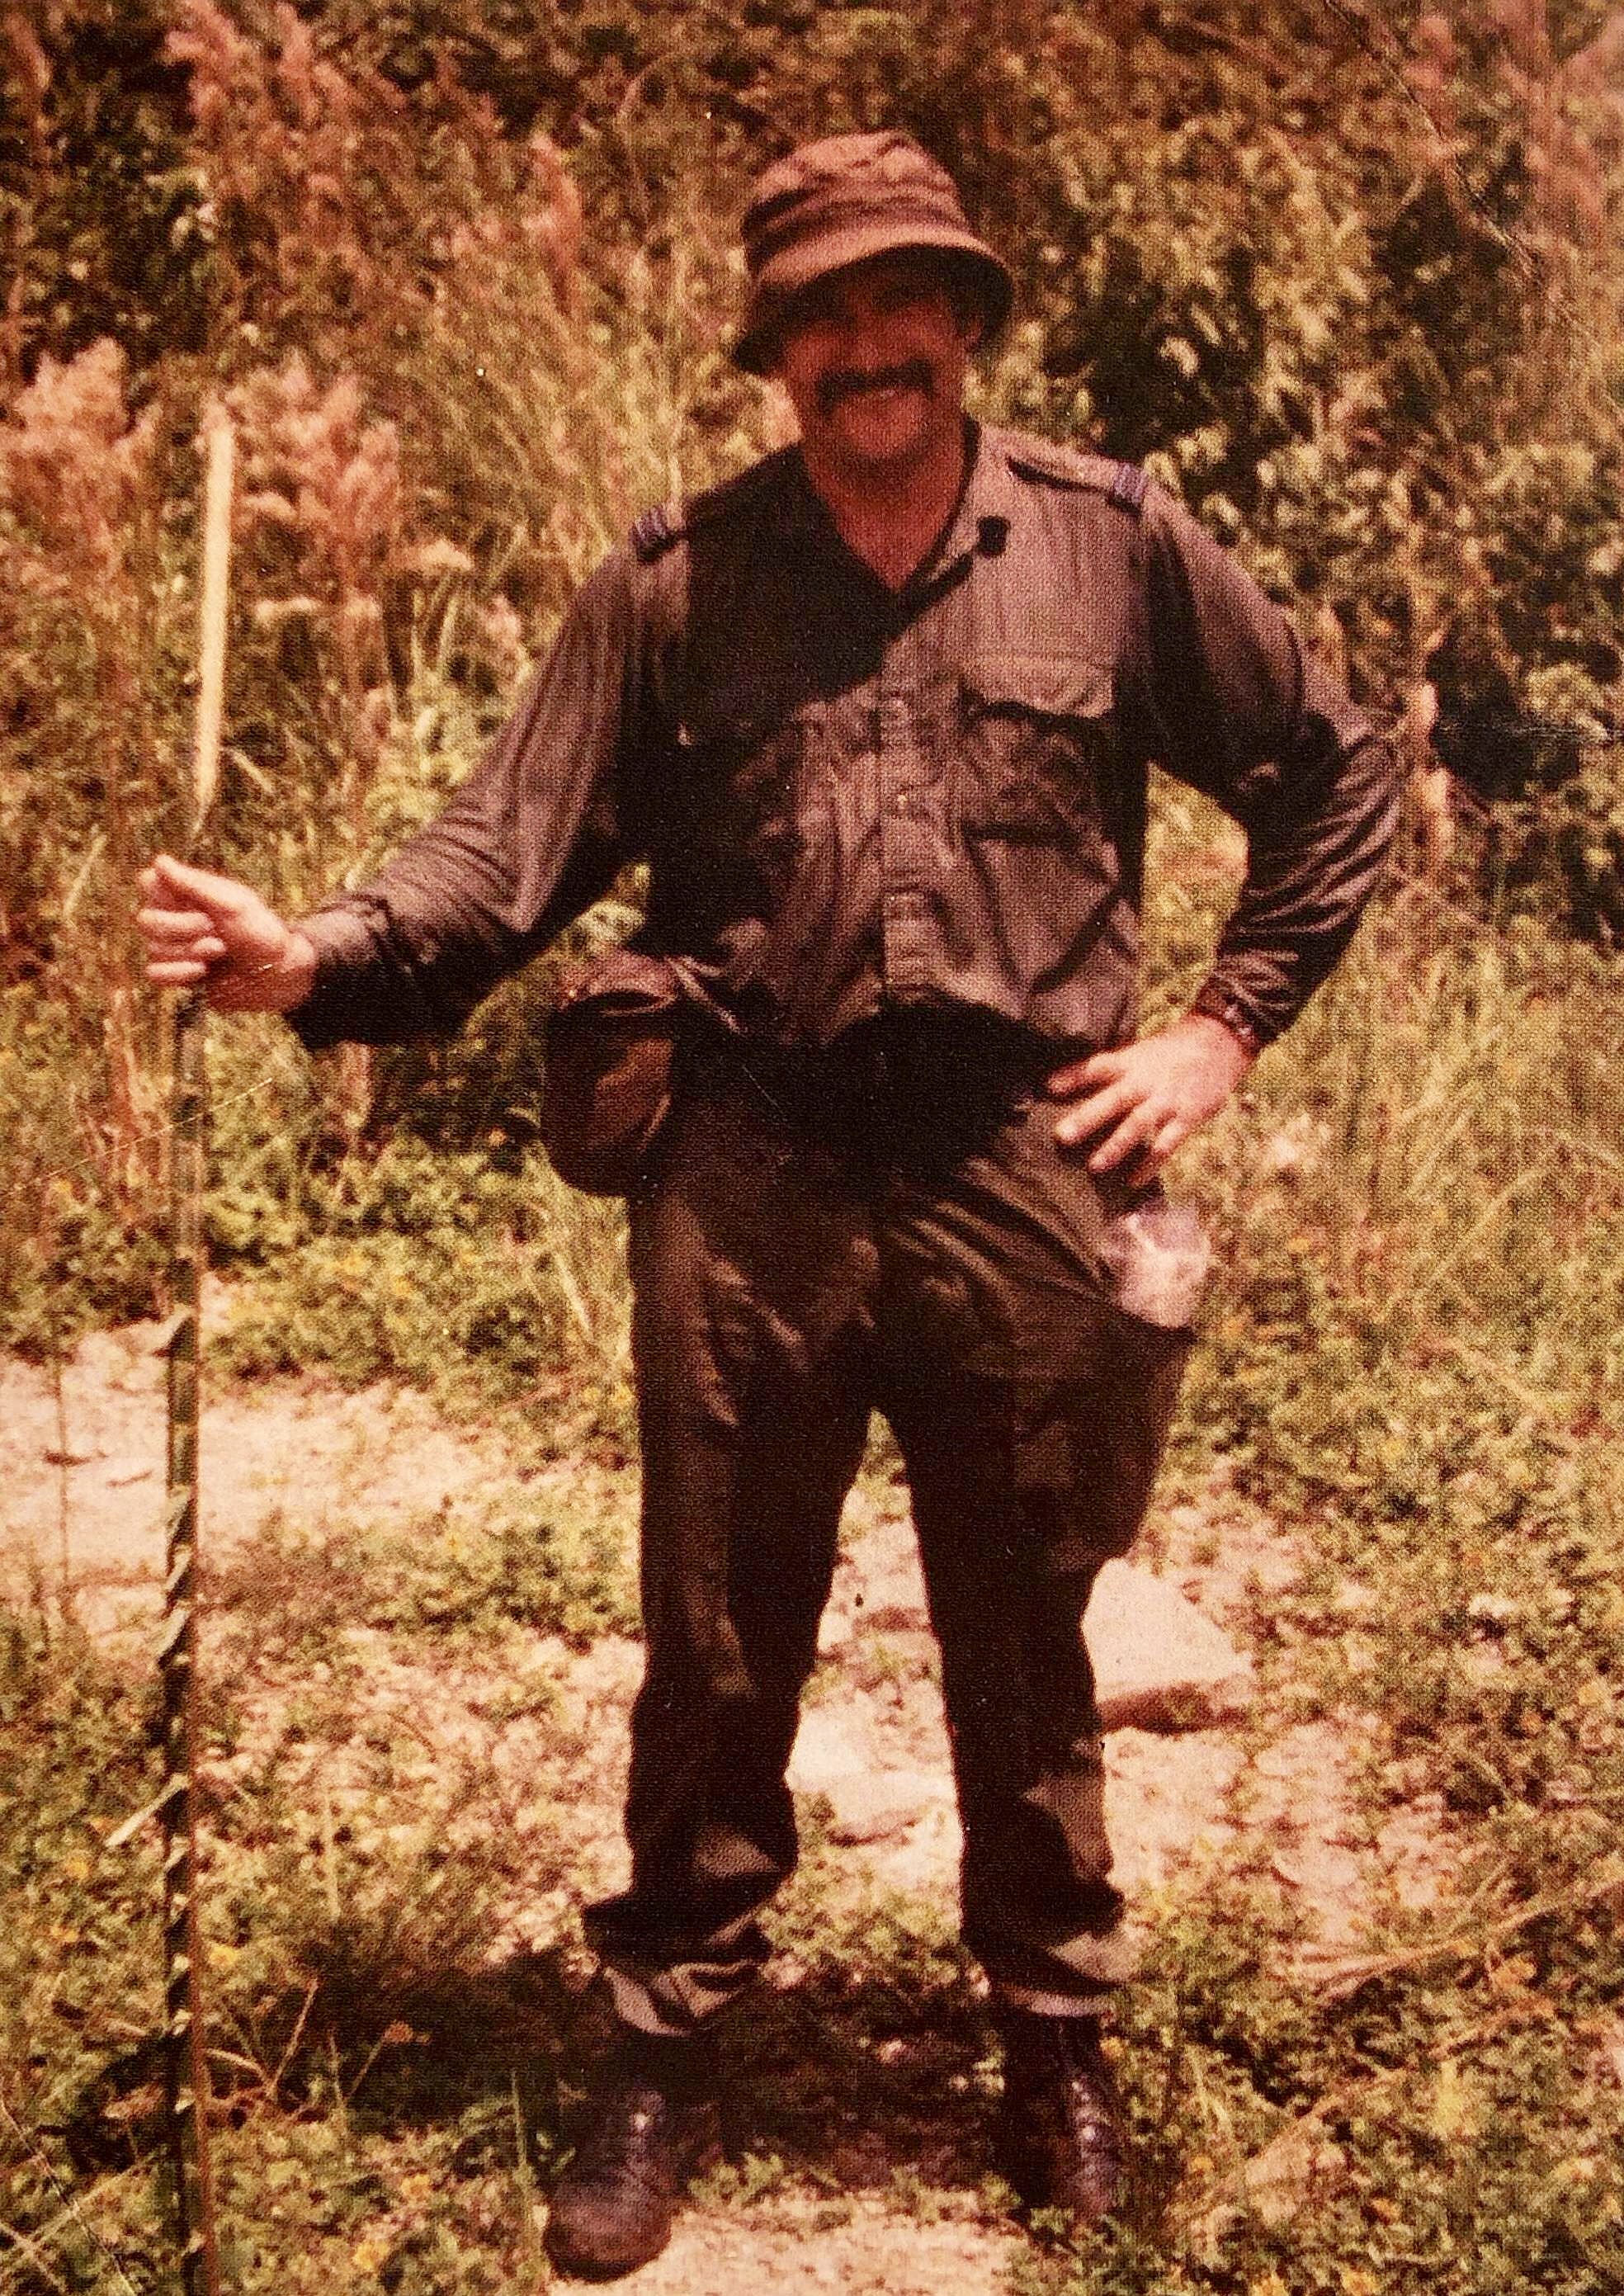 Old photo of soldier in grassy area holding walking stick.